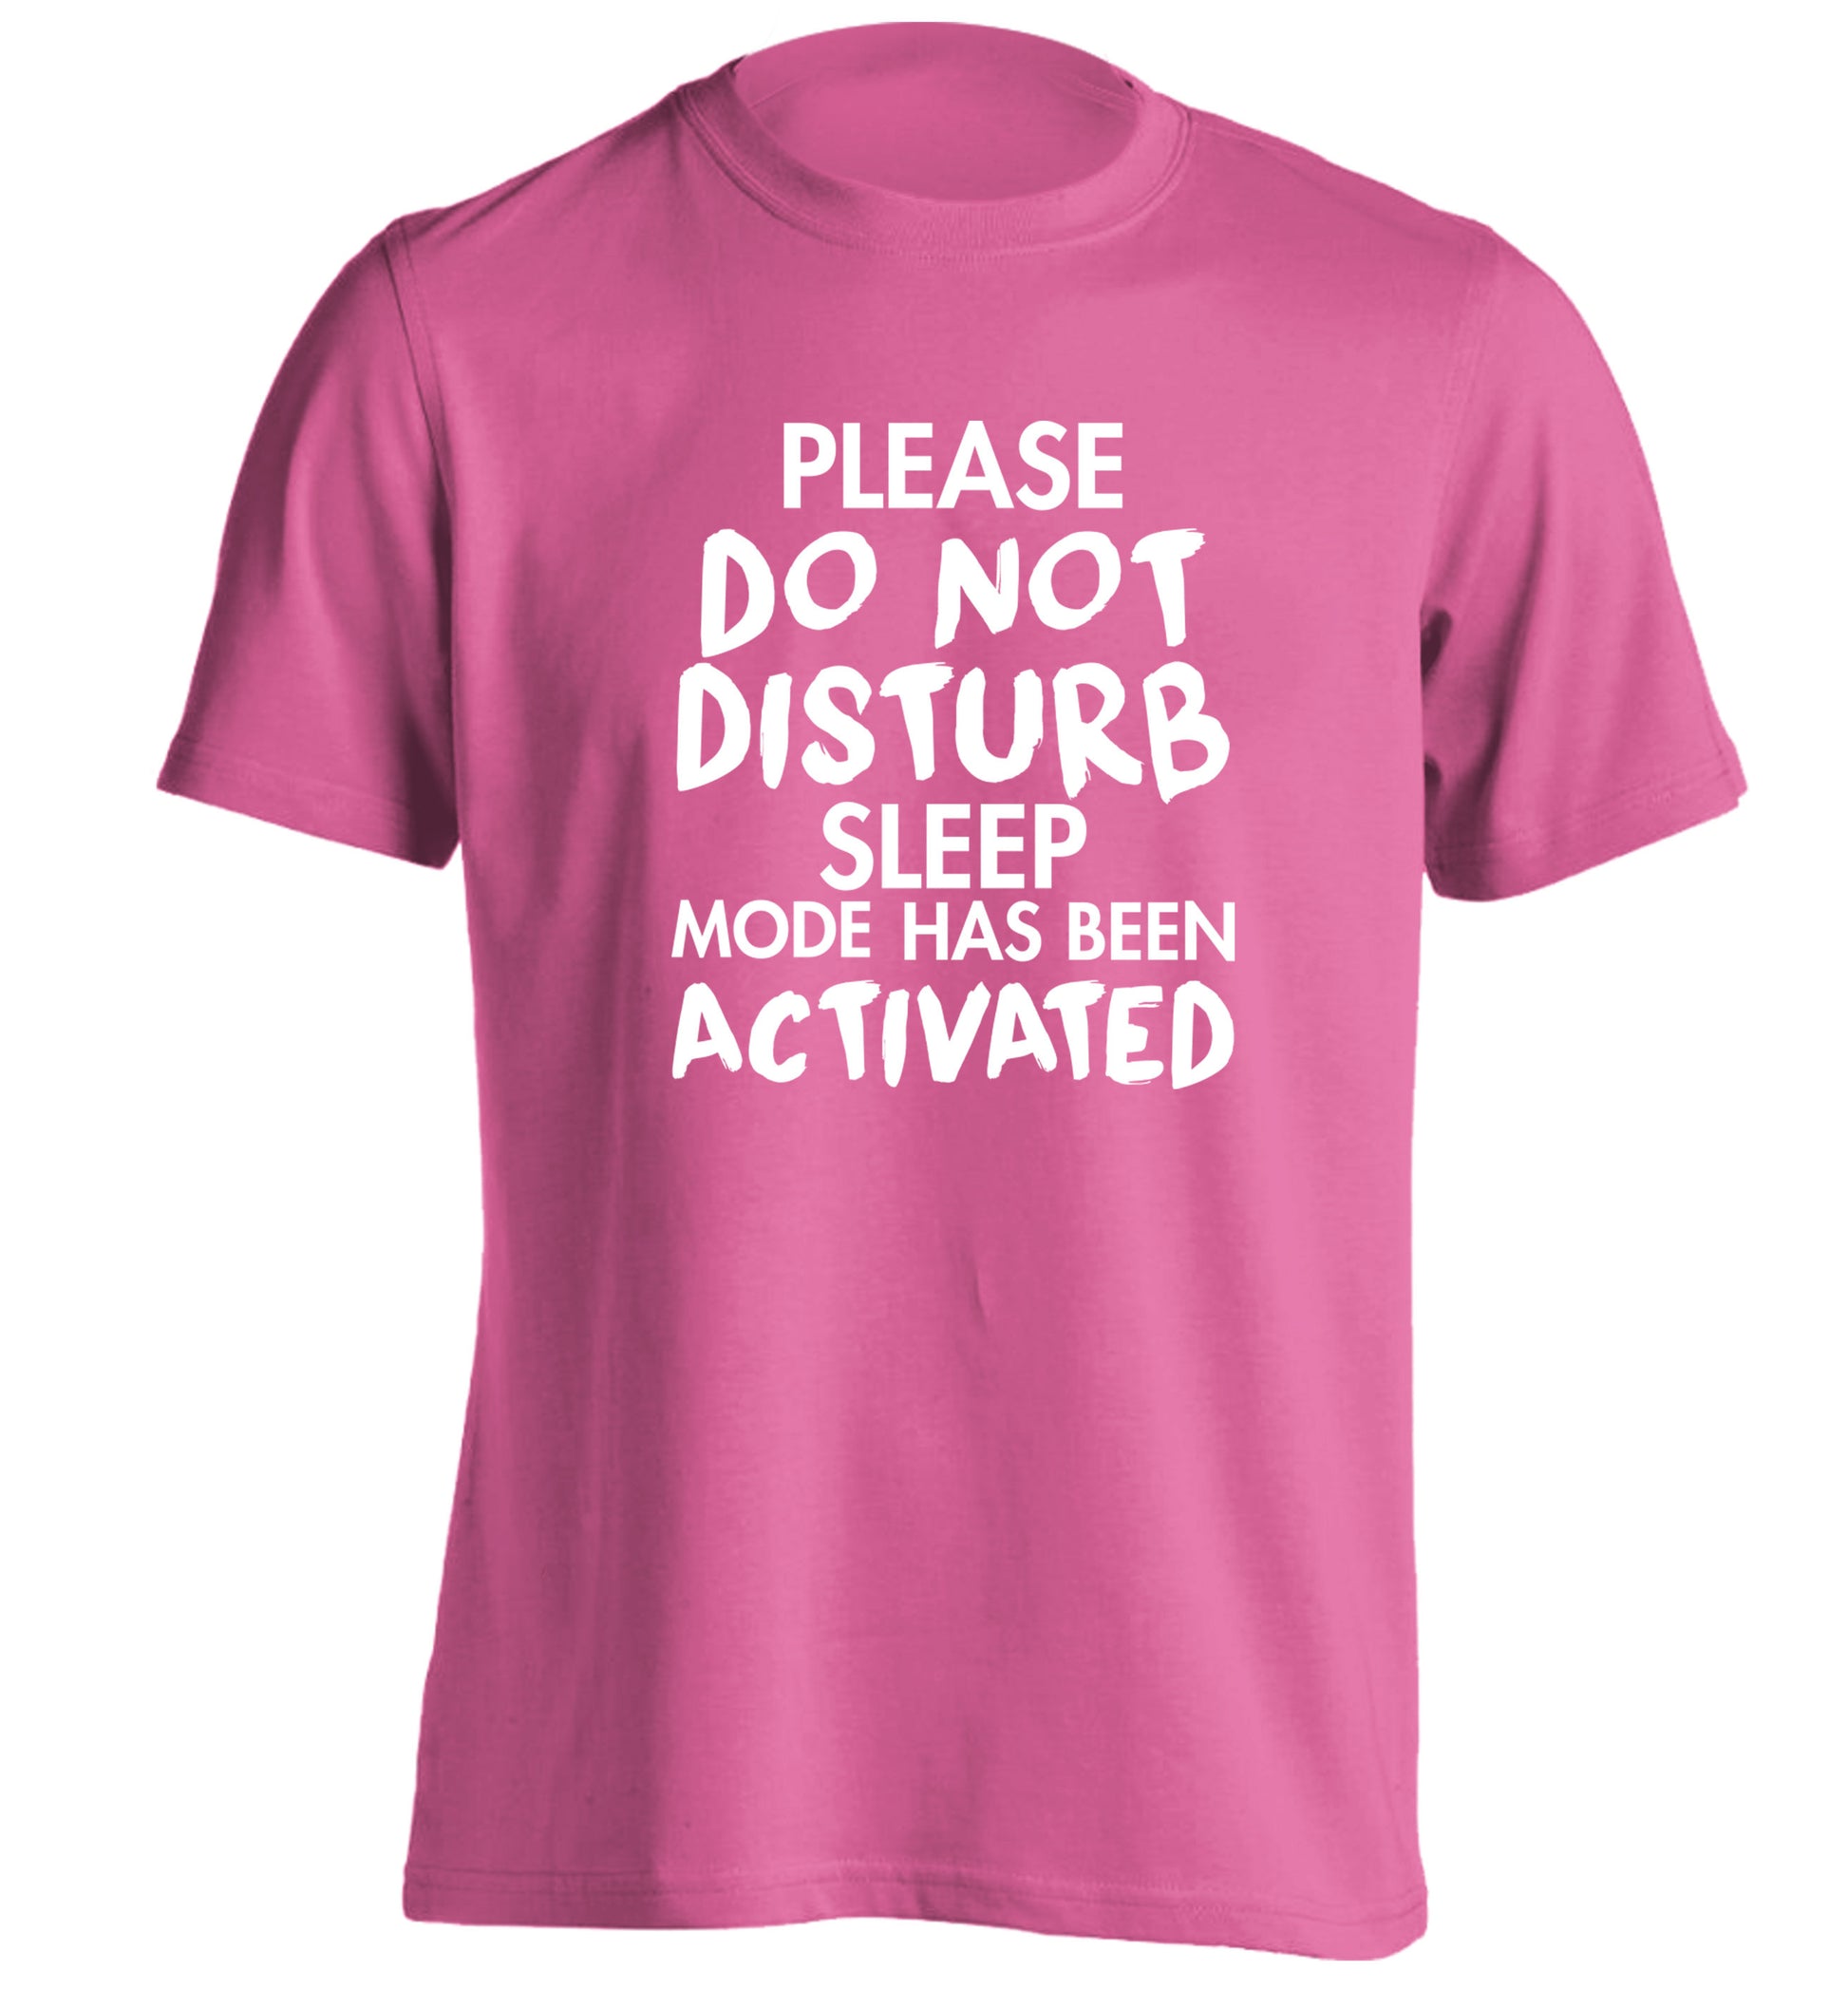 Please do not disturb sleeping mode has been activated adults unisex pink Tshirt 2XL